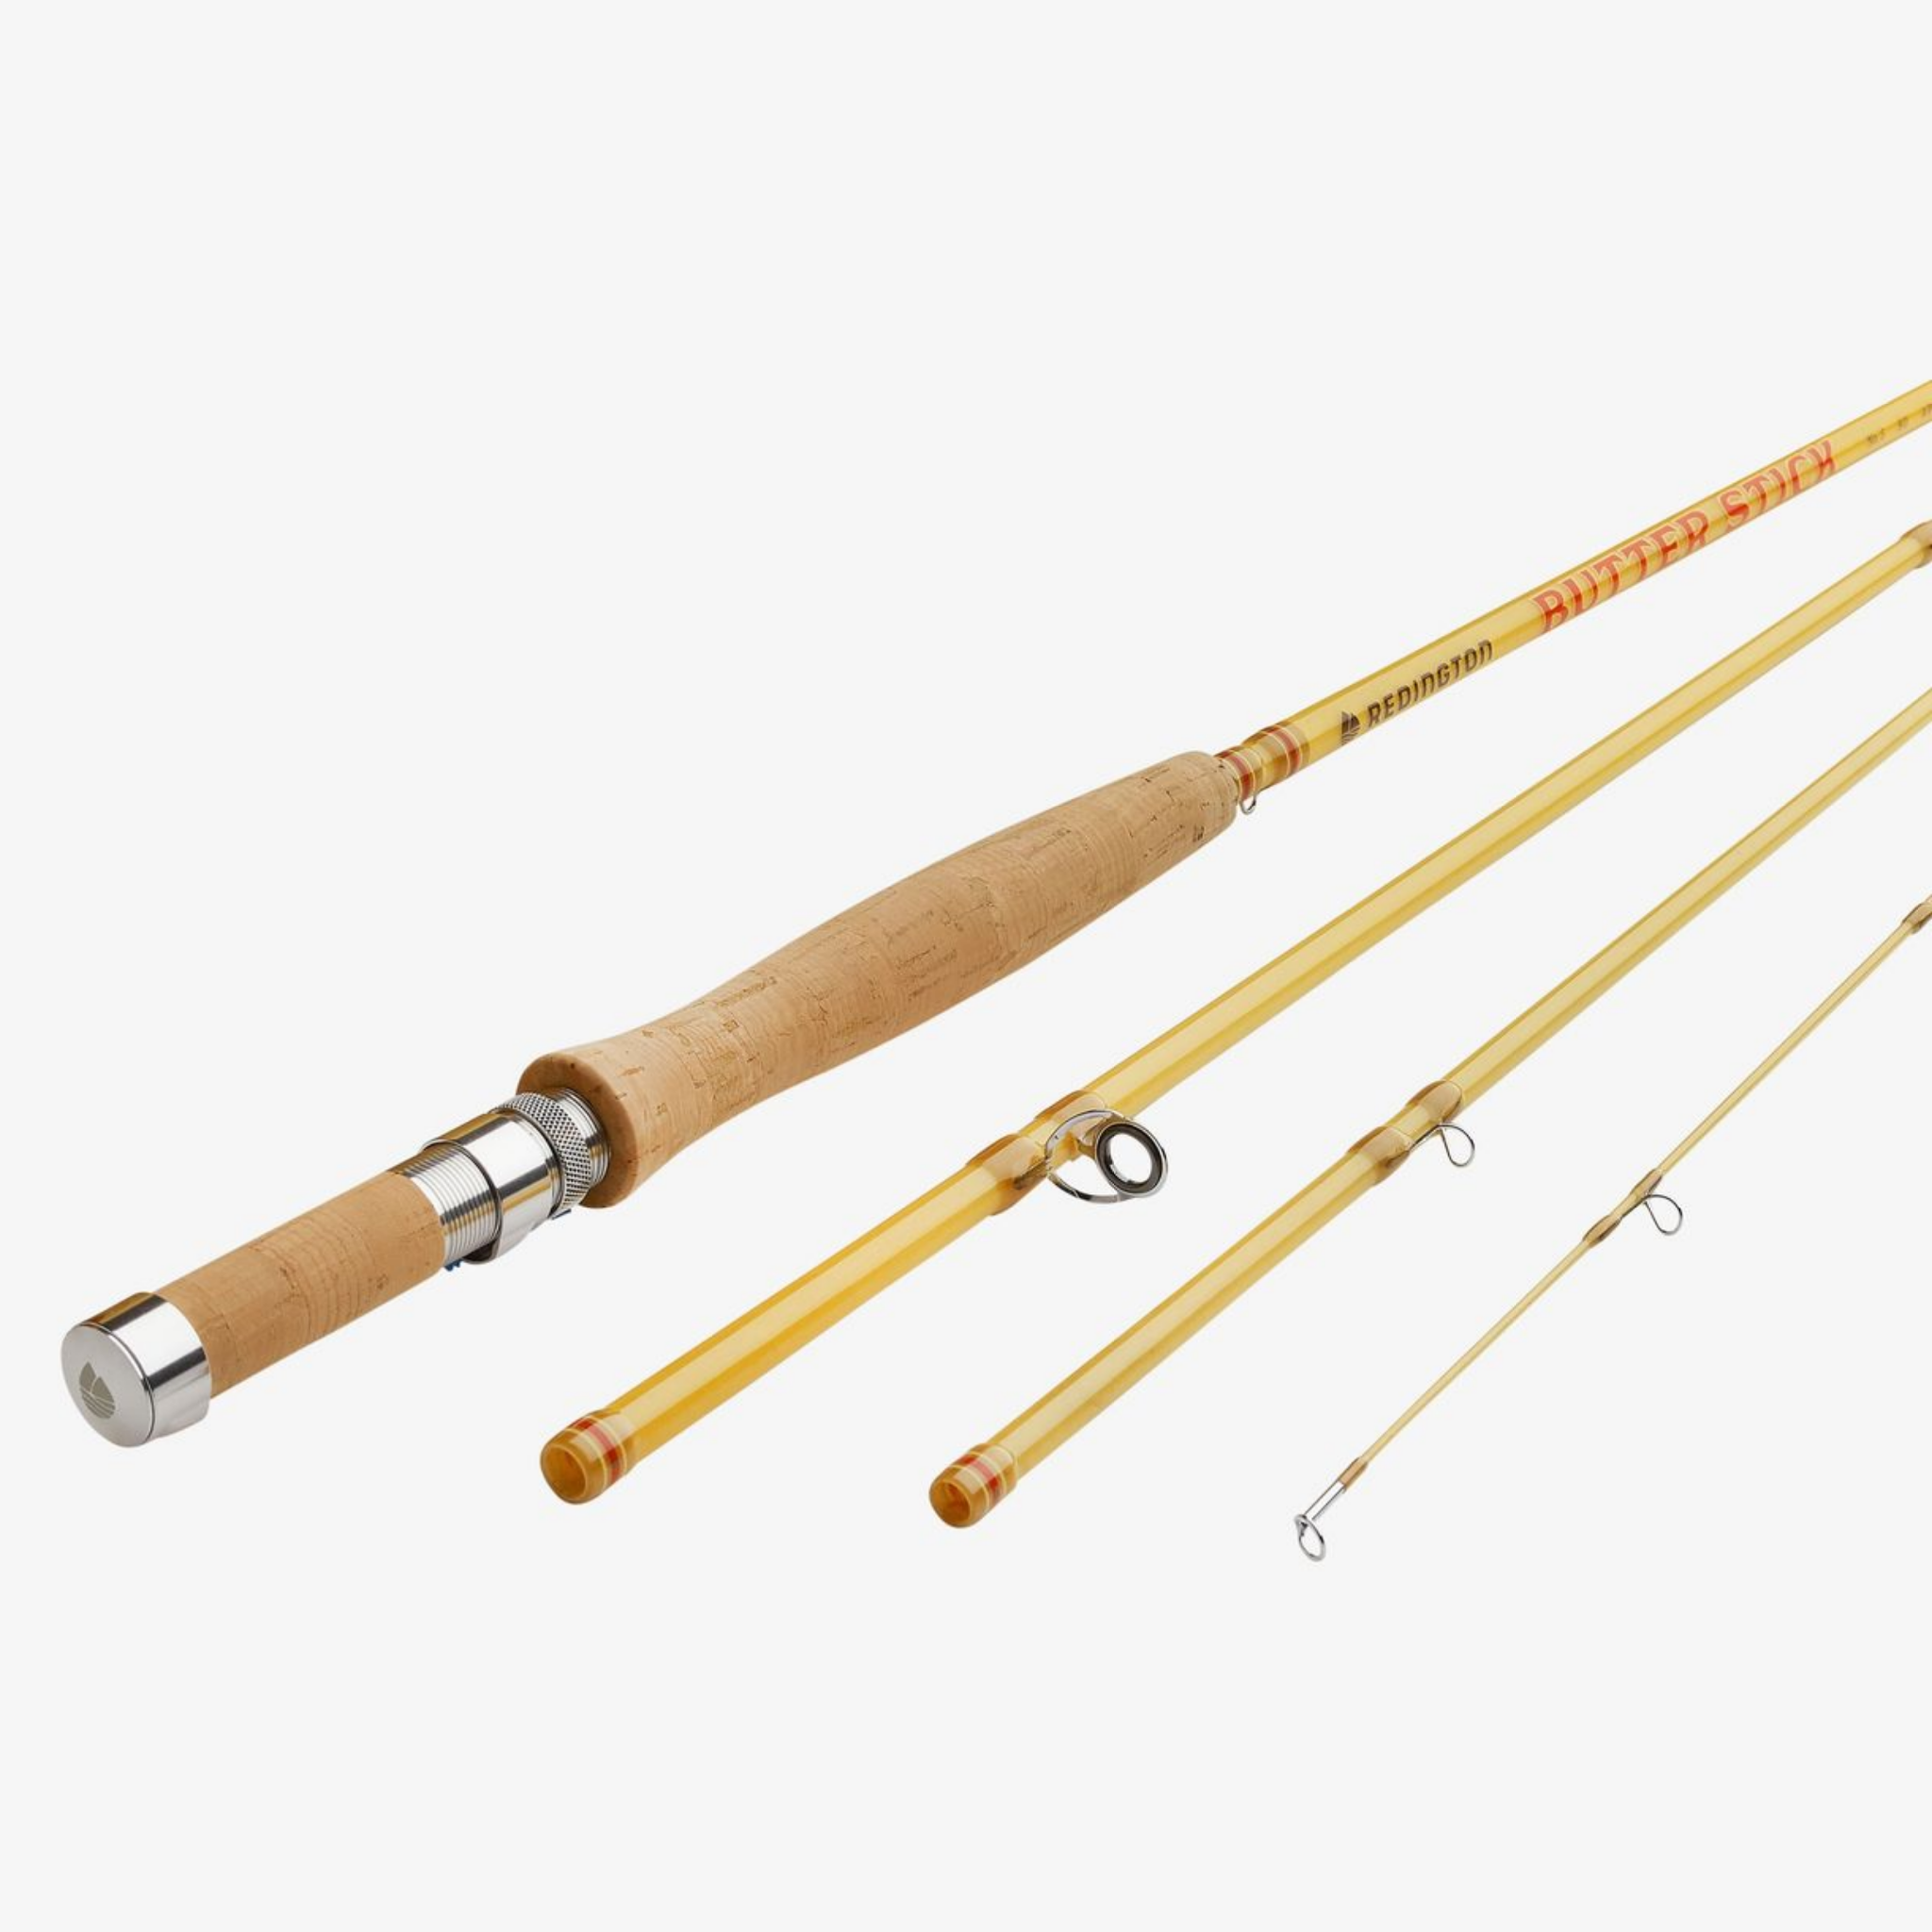 Redington VICE Fly Rod and Reel Combo Review - Man Makes Fire